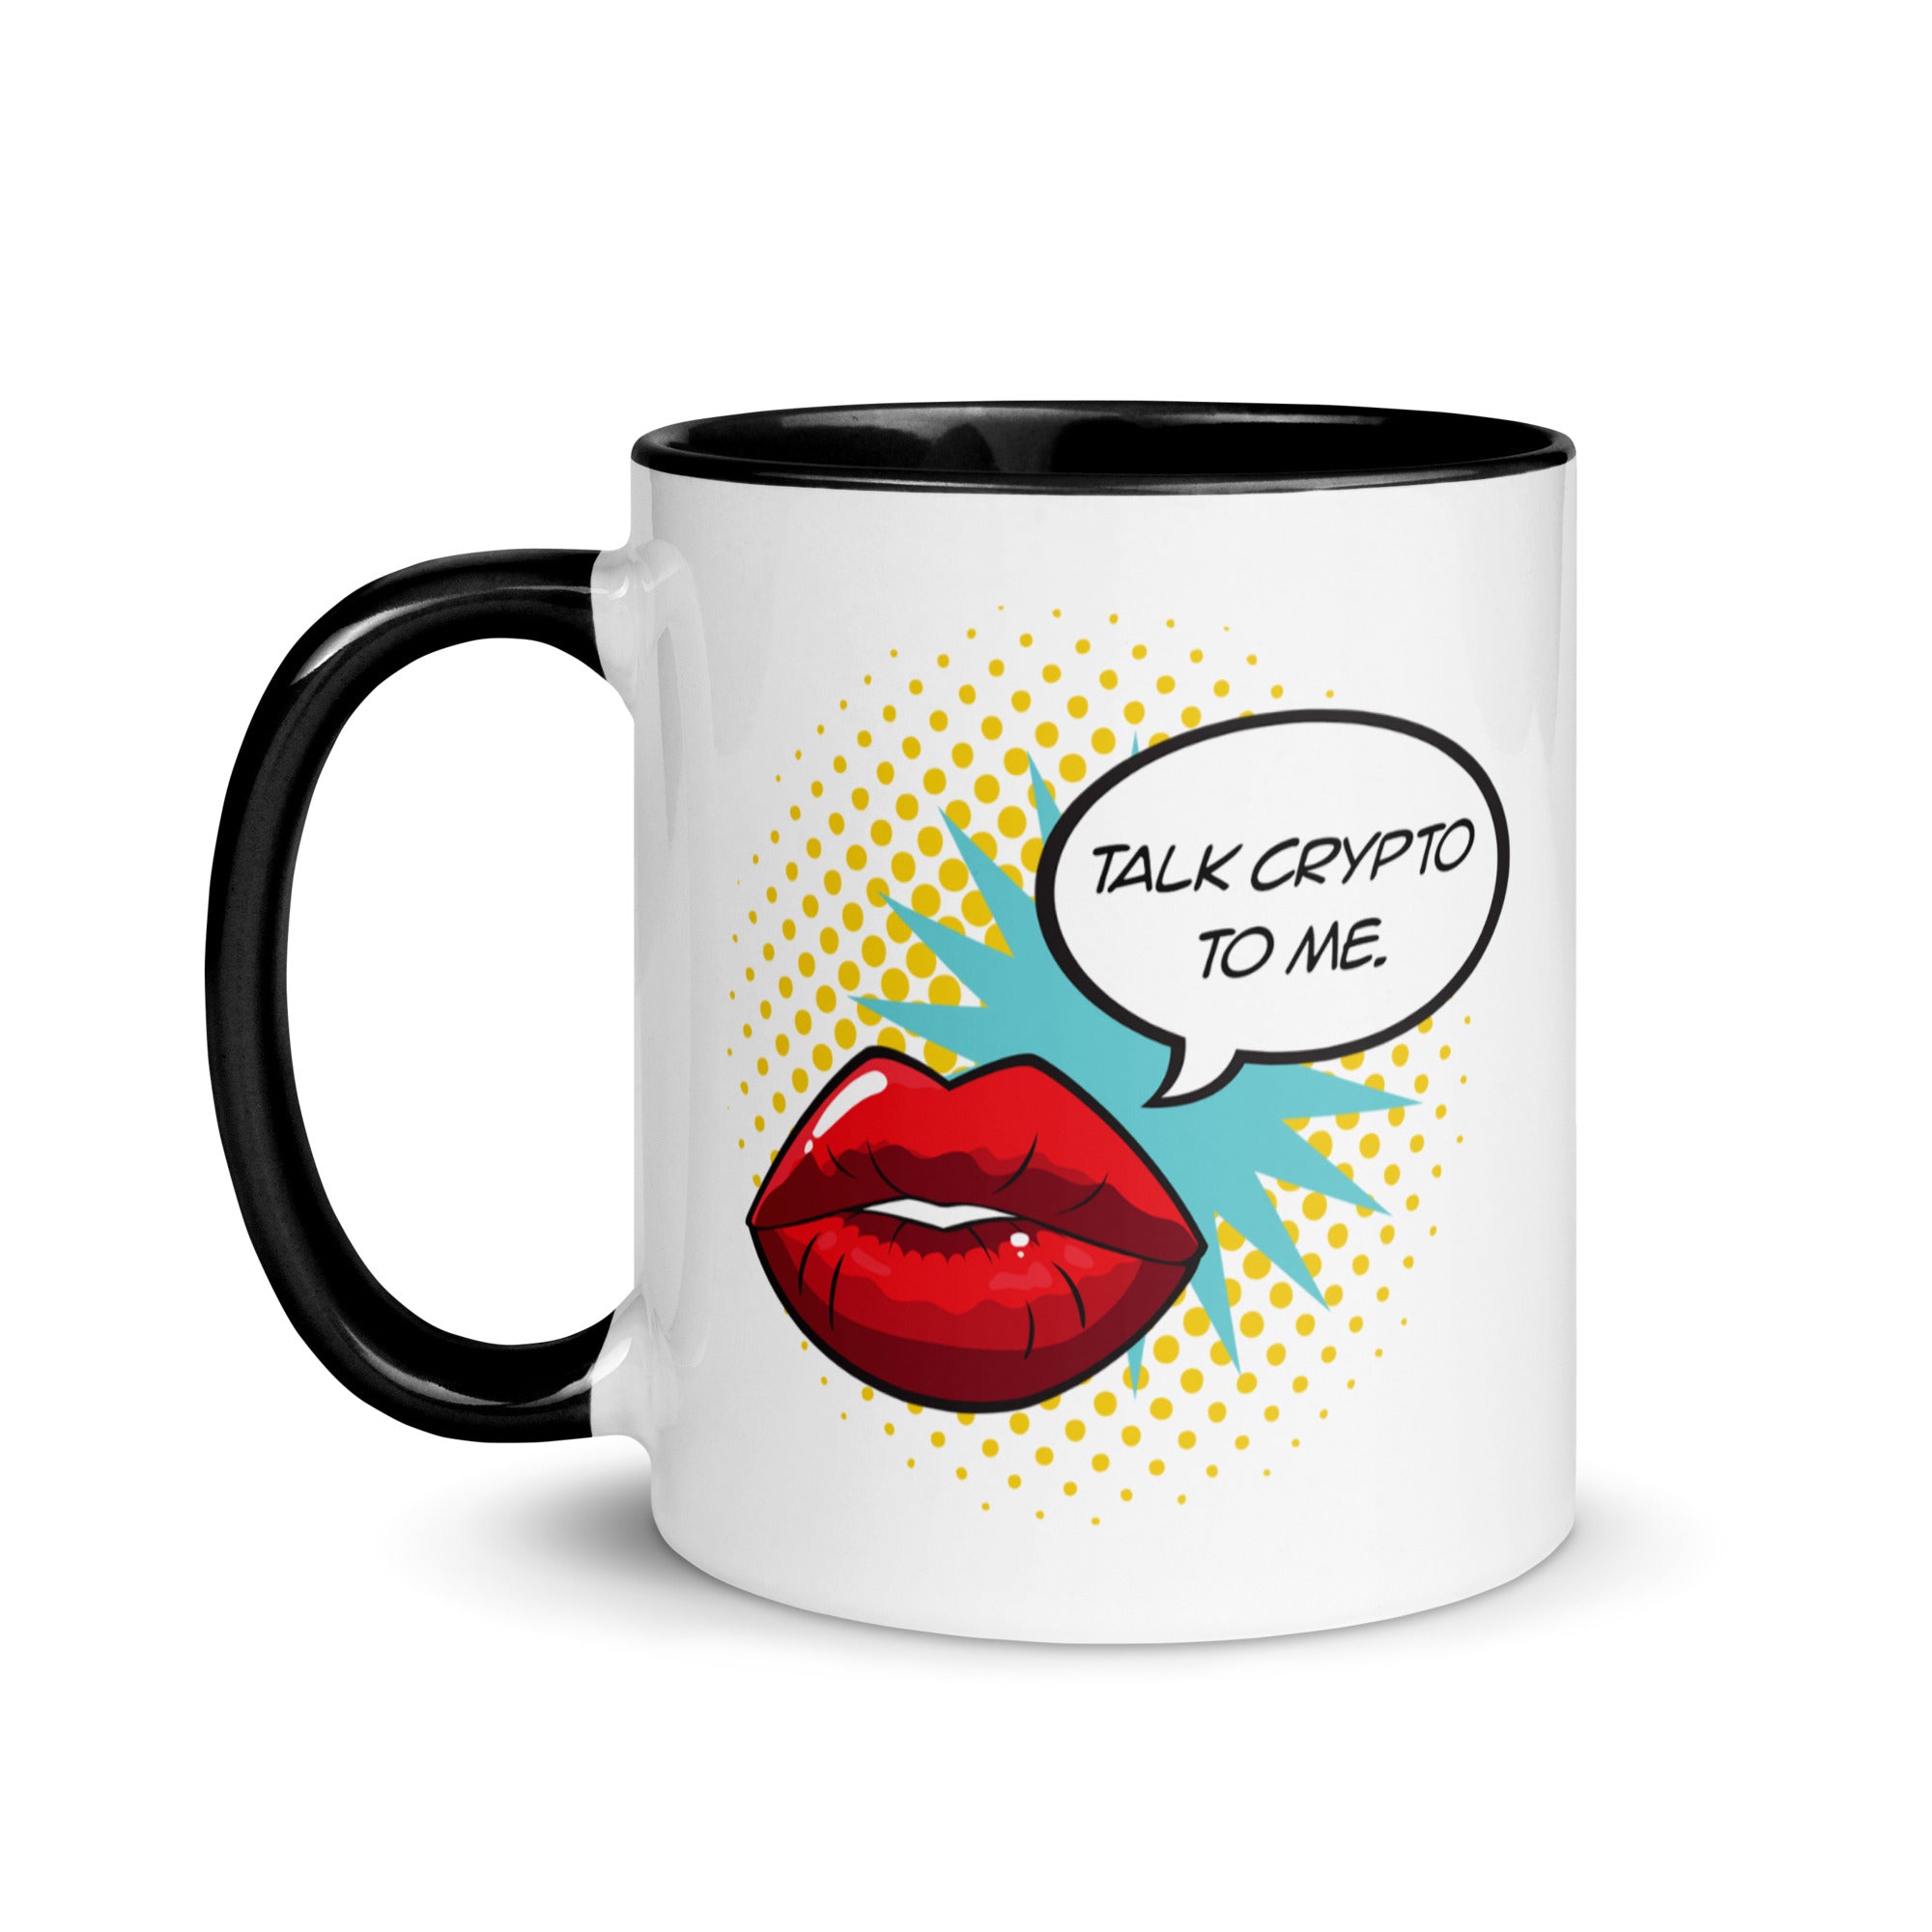 Cryptocurrency Gift Ideas - Talk Crypto To Me Mug. Left handle view.